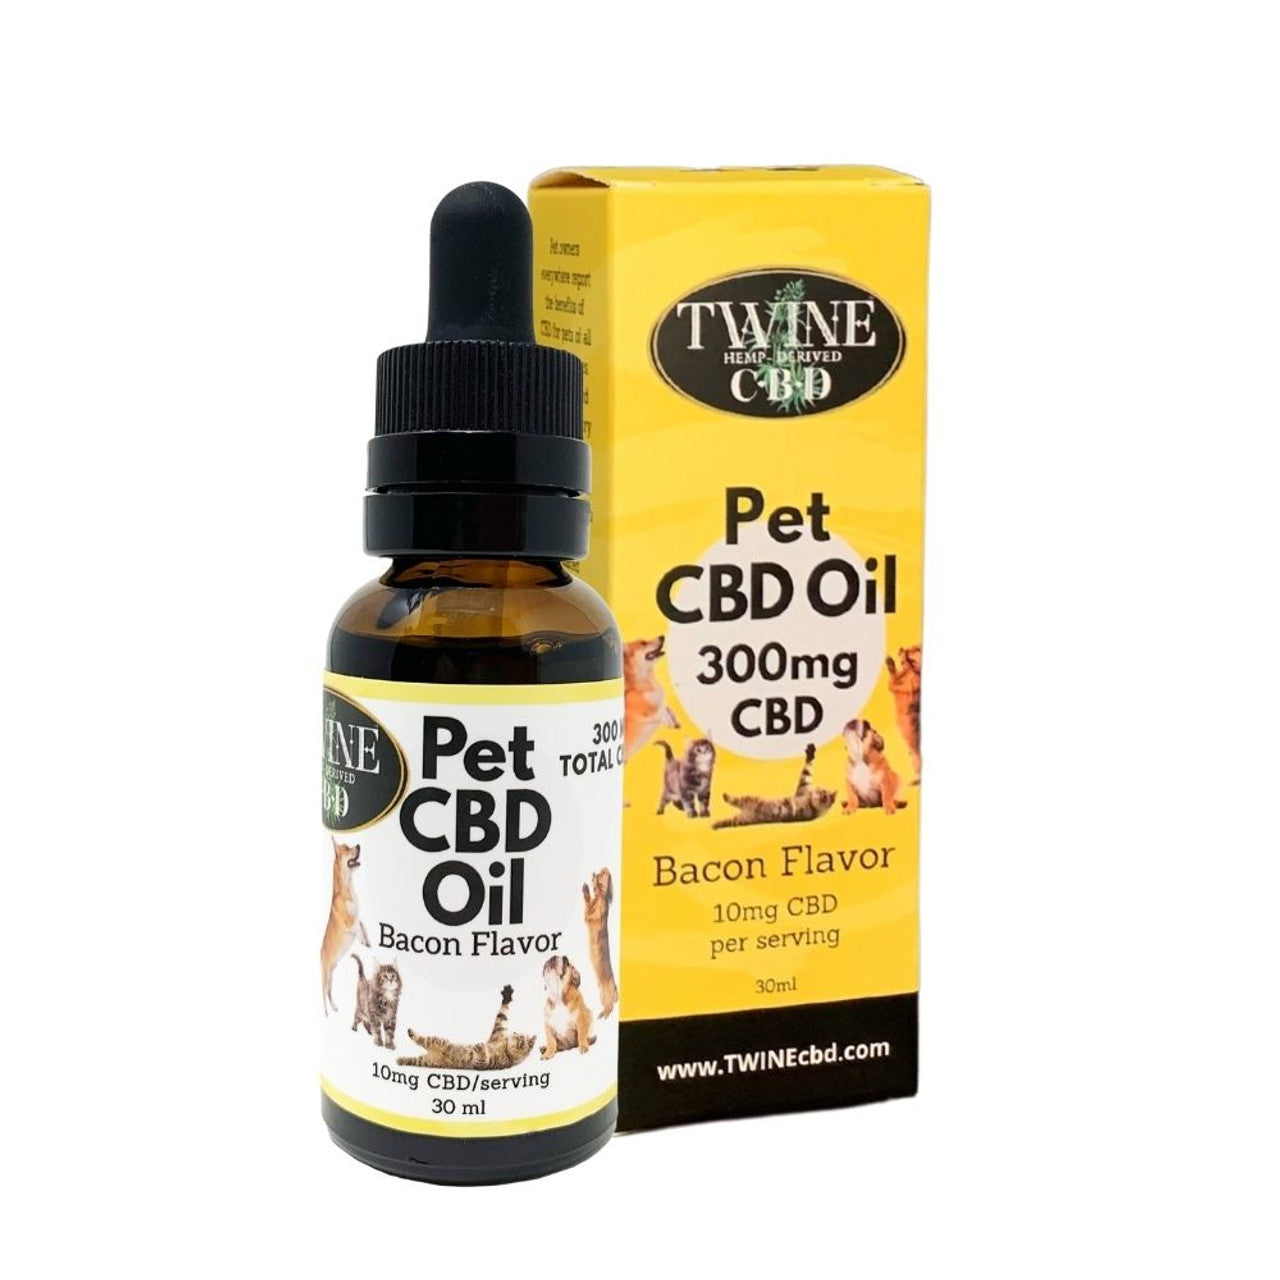 300mg Pet CBD Oil for Dogs or Cats 99% Pure Organic CBD Isolate THC Free 30ml Bottle Bacon